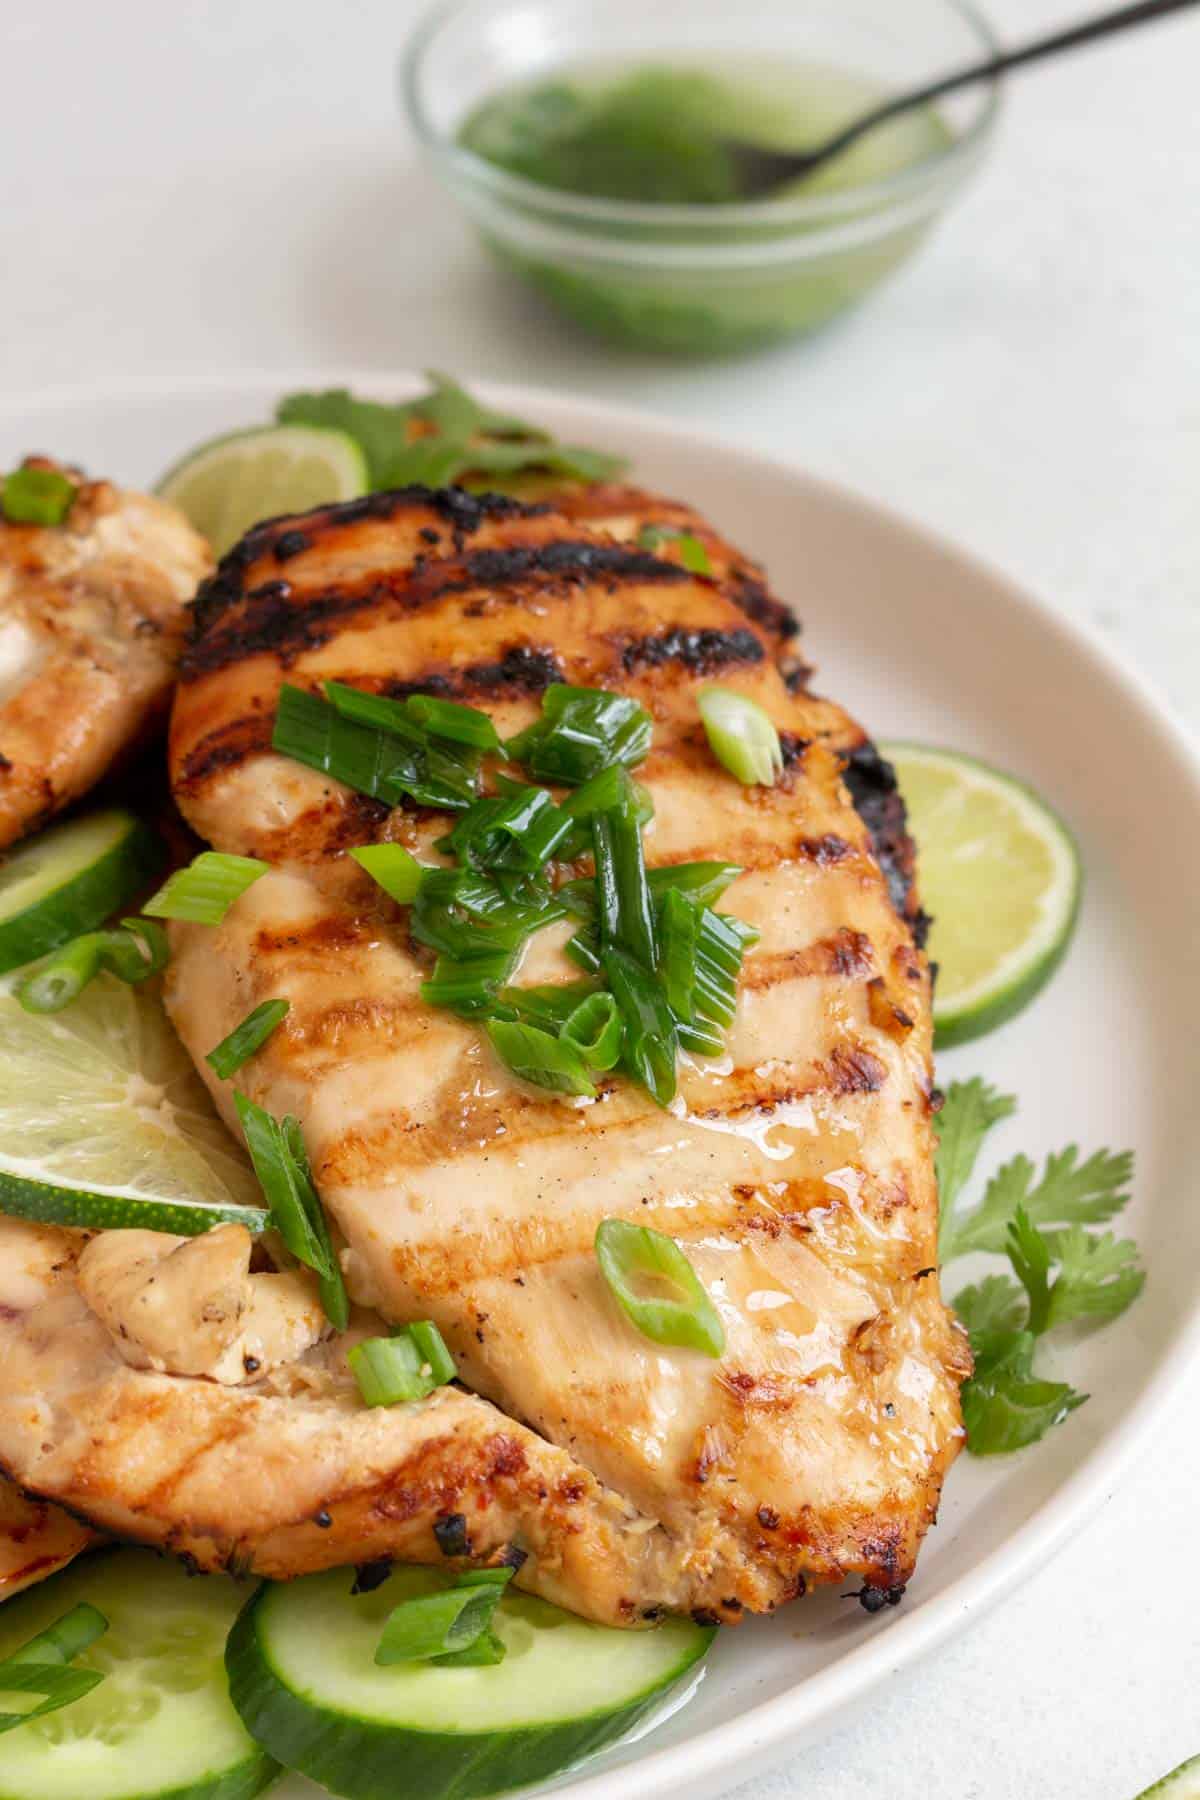 A close up view of a grilled lemongrass chicken breast with scallion oil on top.